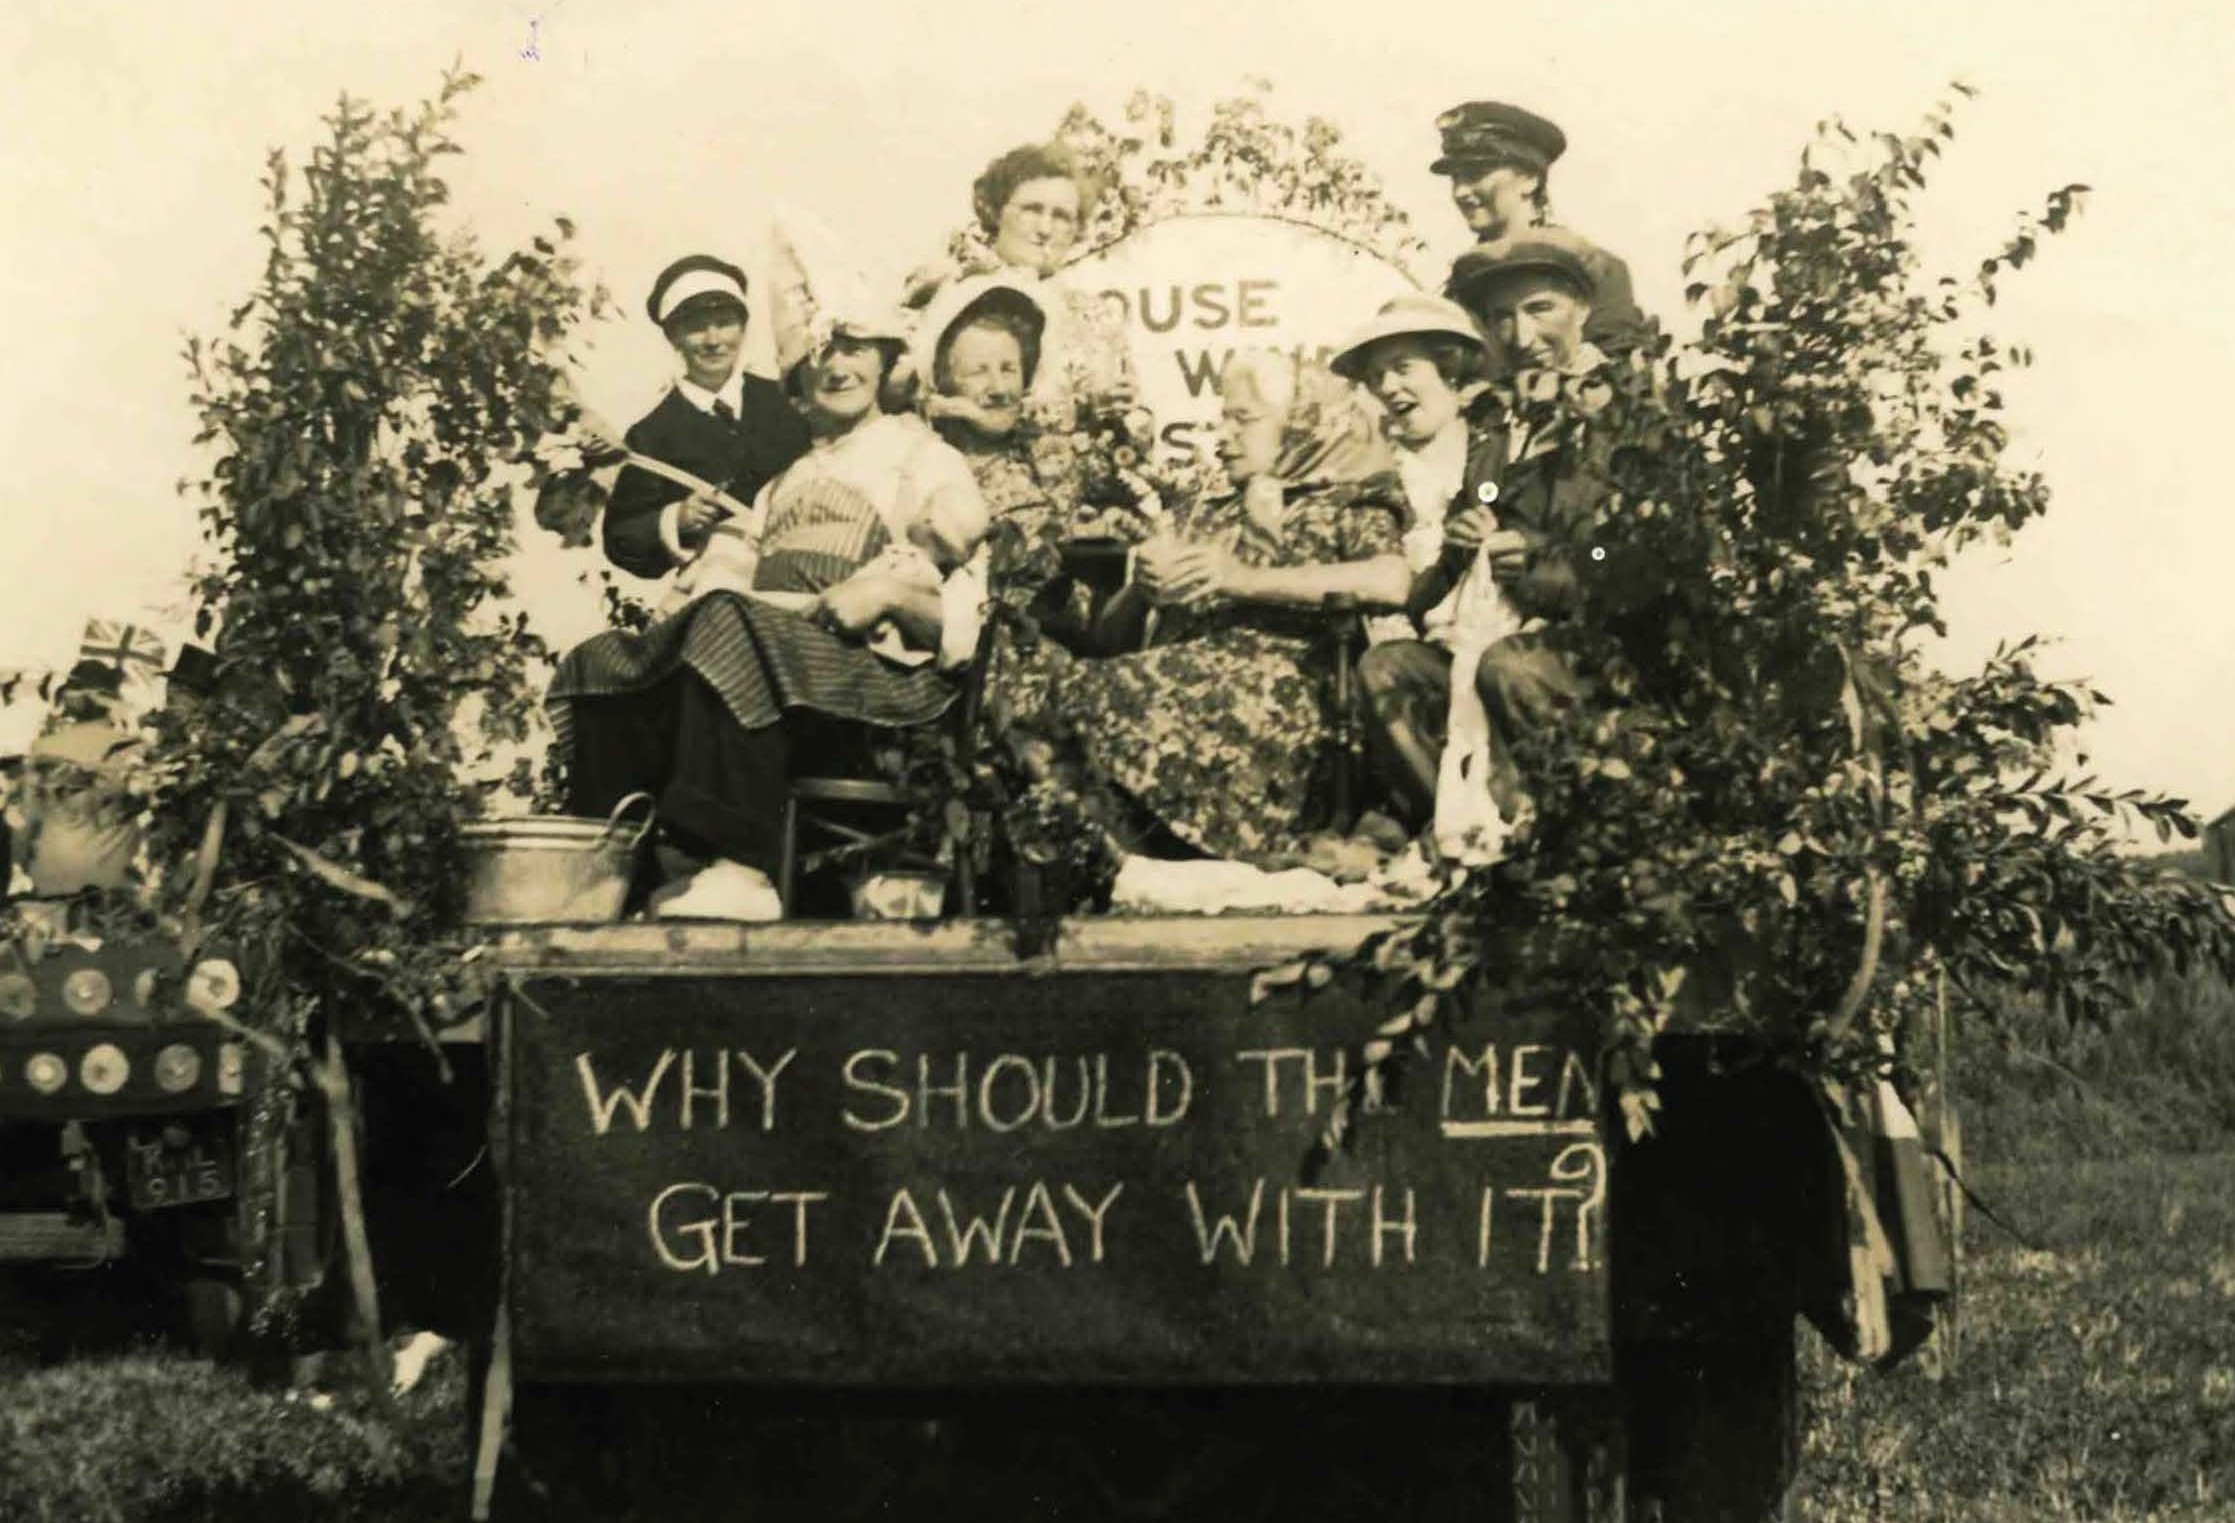 1955 Port Isaac Carnival Float - Housewive's Strike